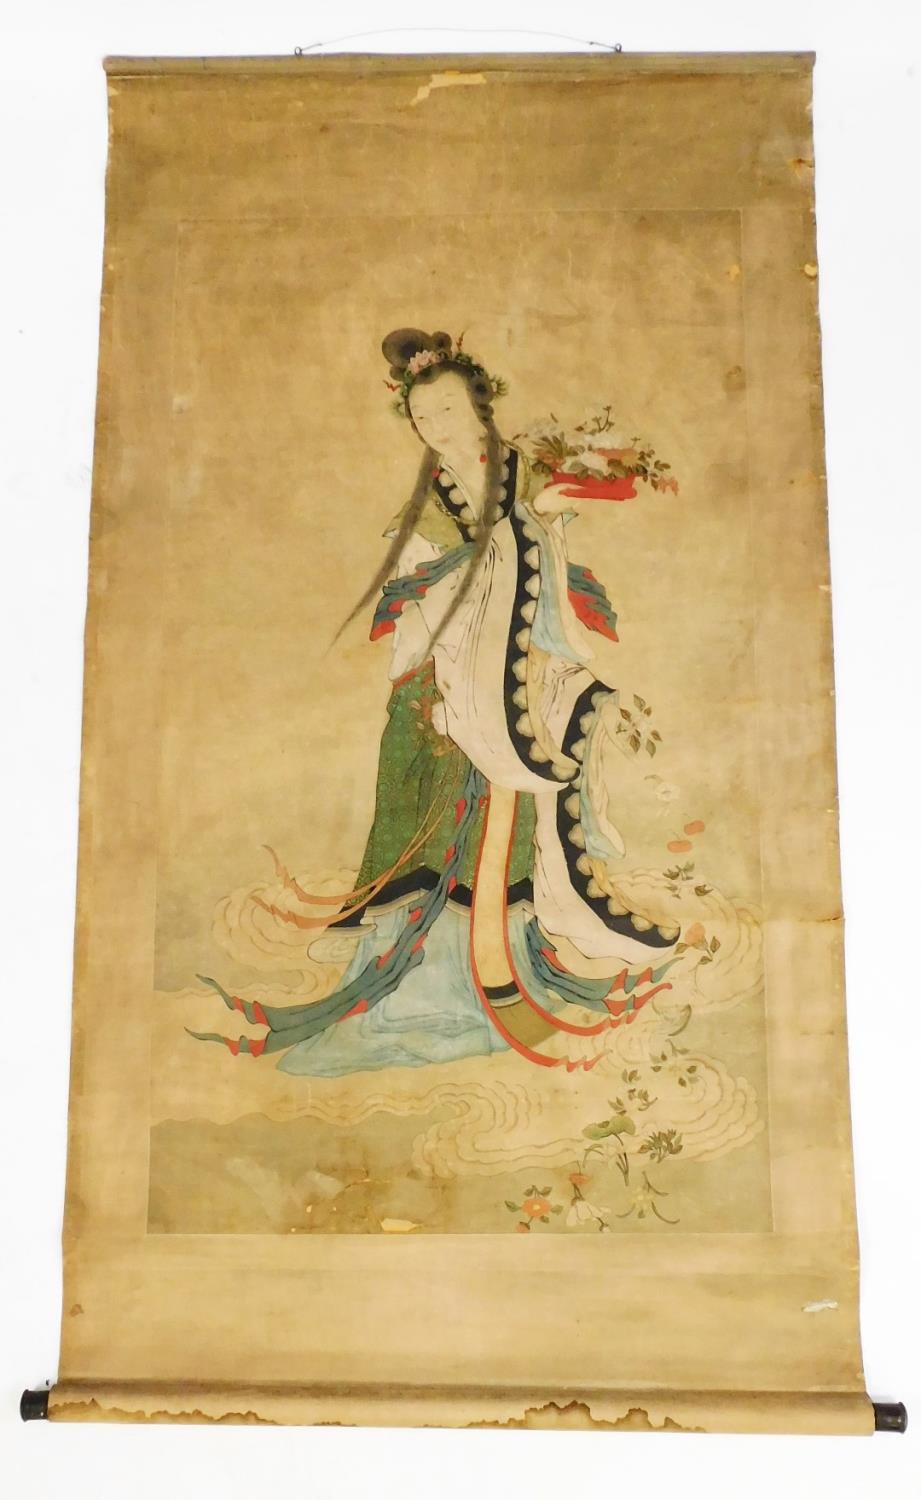 A Chinese scroll, painted with the figure of the goddess of compassion Guan Yin standing on a